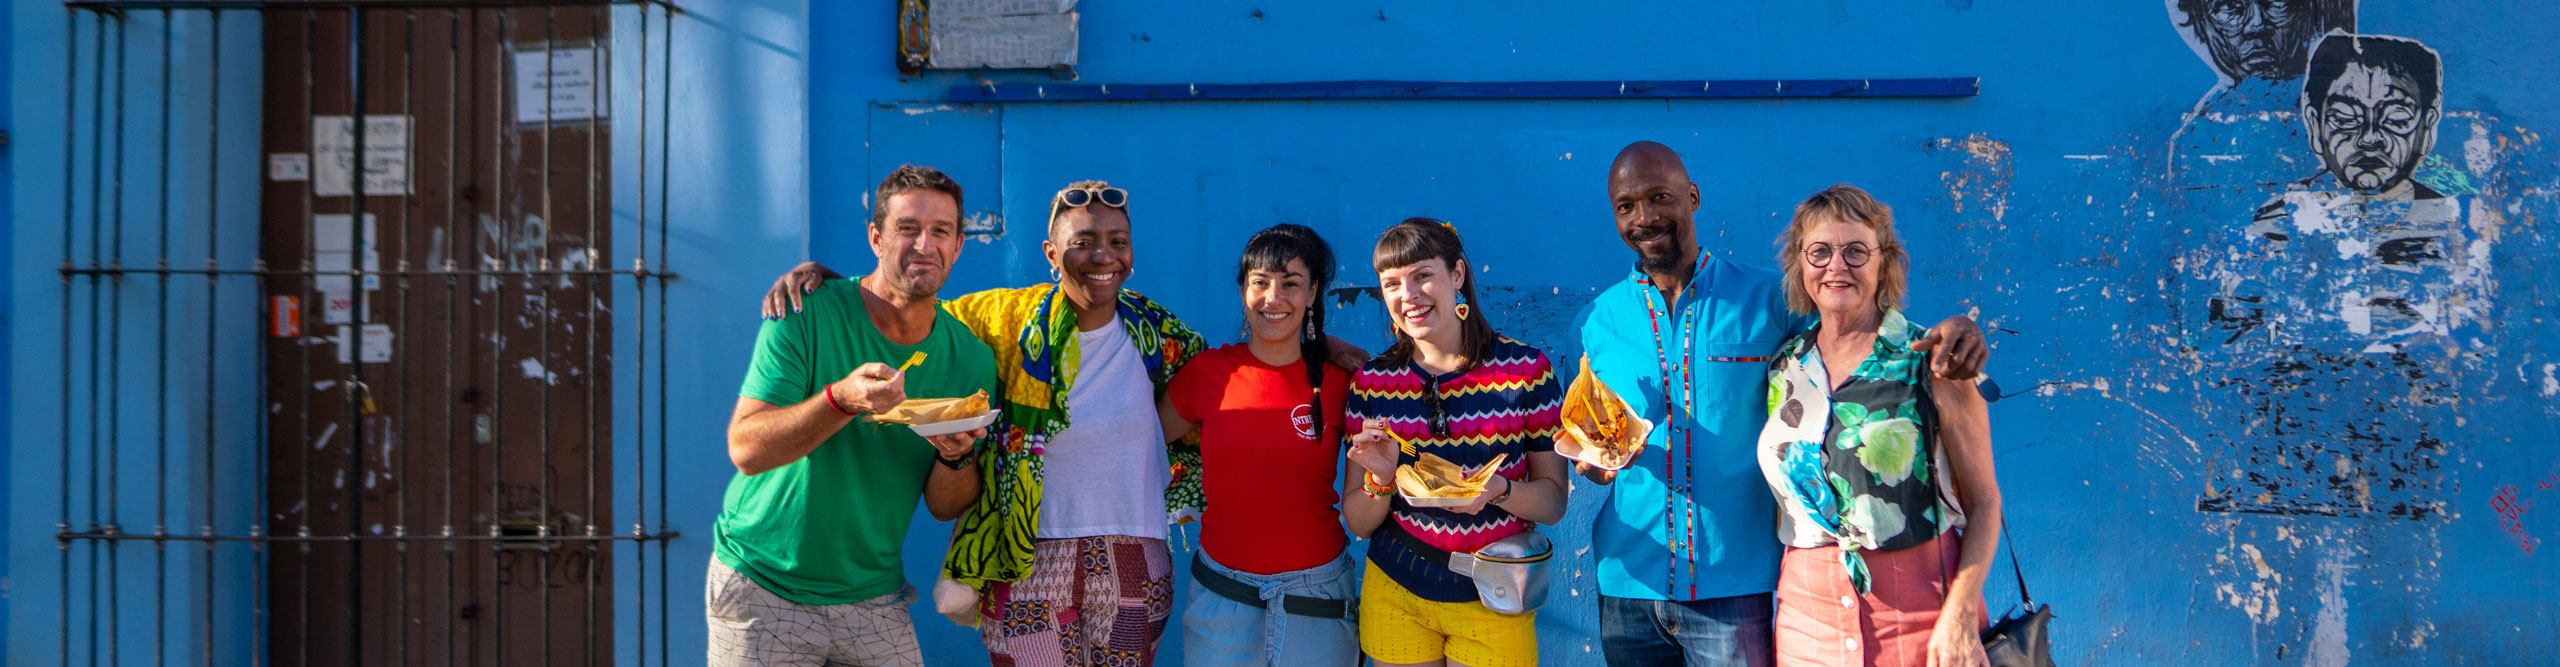 Intrepid travellers and leader with tasty street food in Oaxaca in Mexico